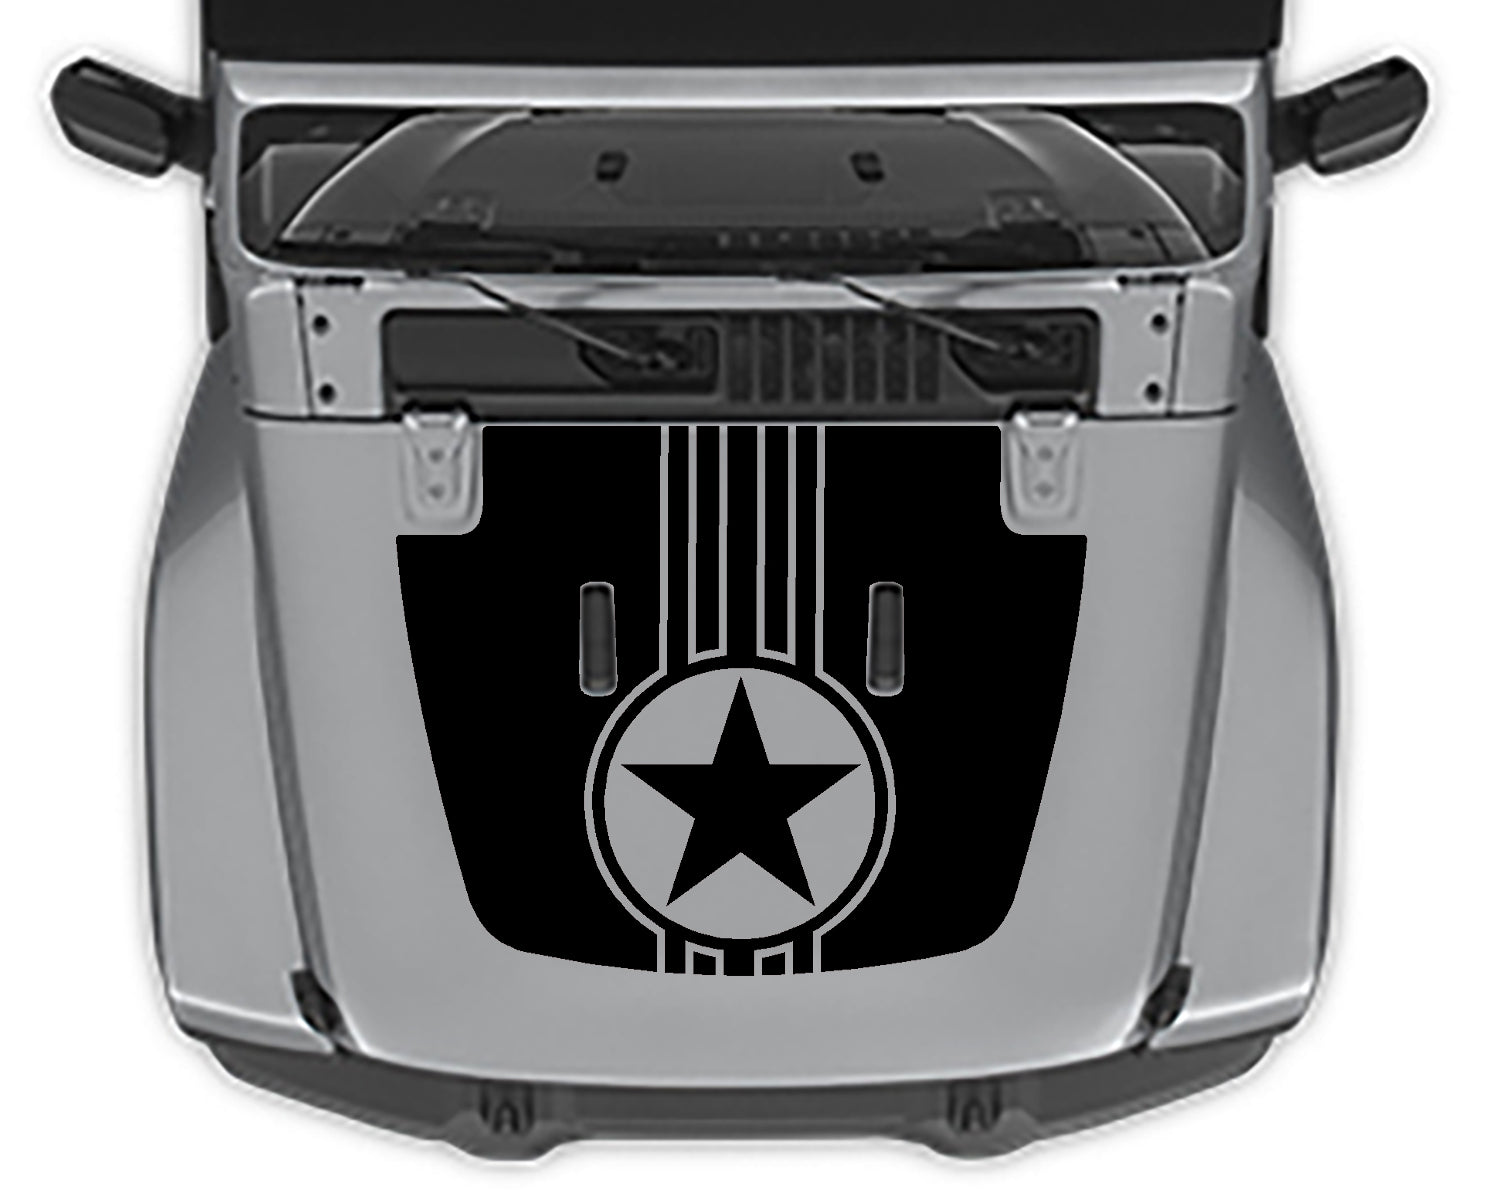 Star Car Stickers. Car Hood and Side Body Sticker Set. Mustang